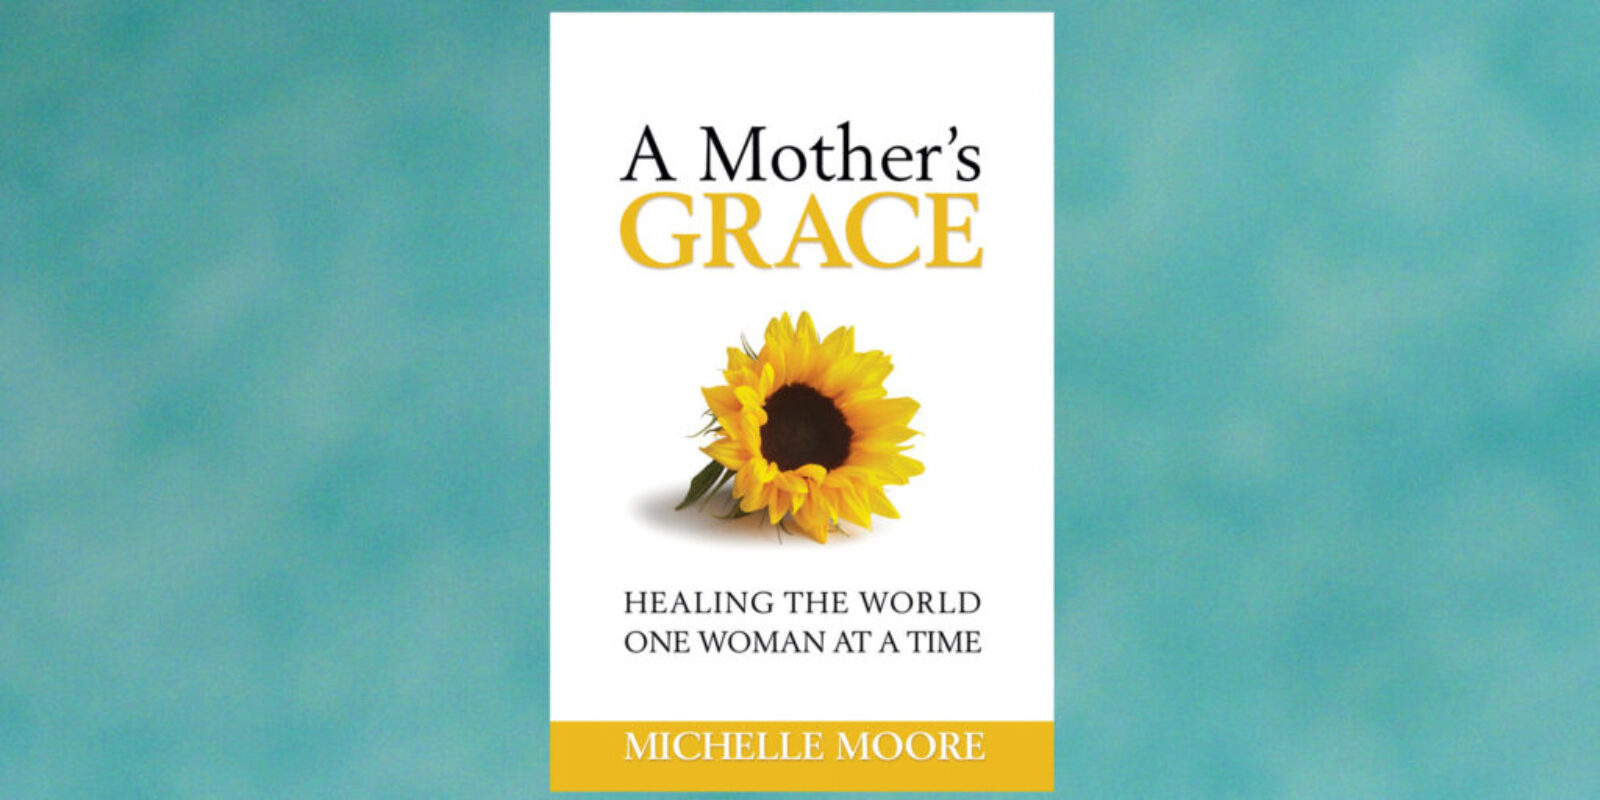 A-Mothers-Grace-Healing-the-World-One-Woman-at-a-Time-by-Michelle-Moore-Header